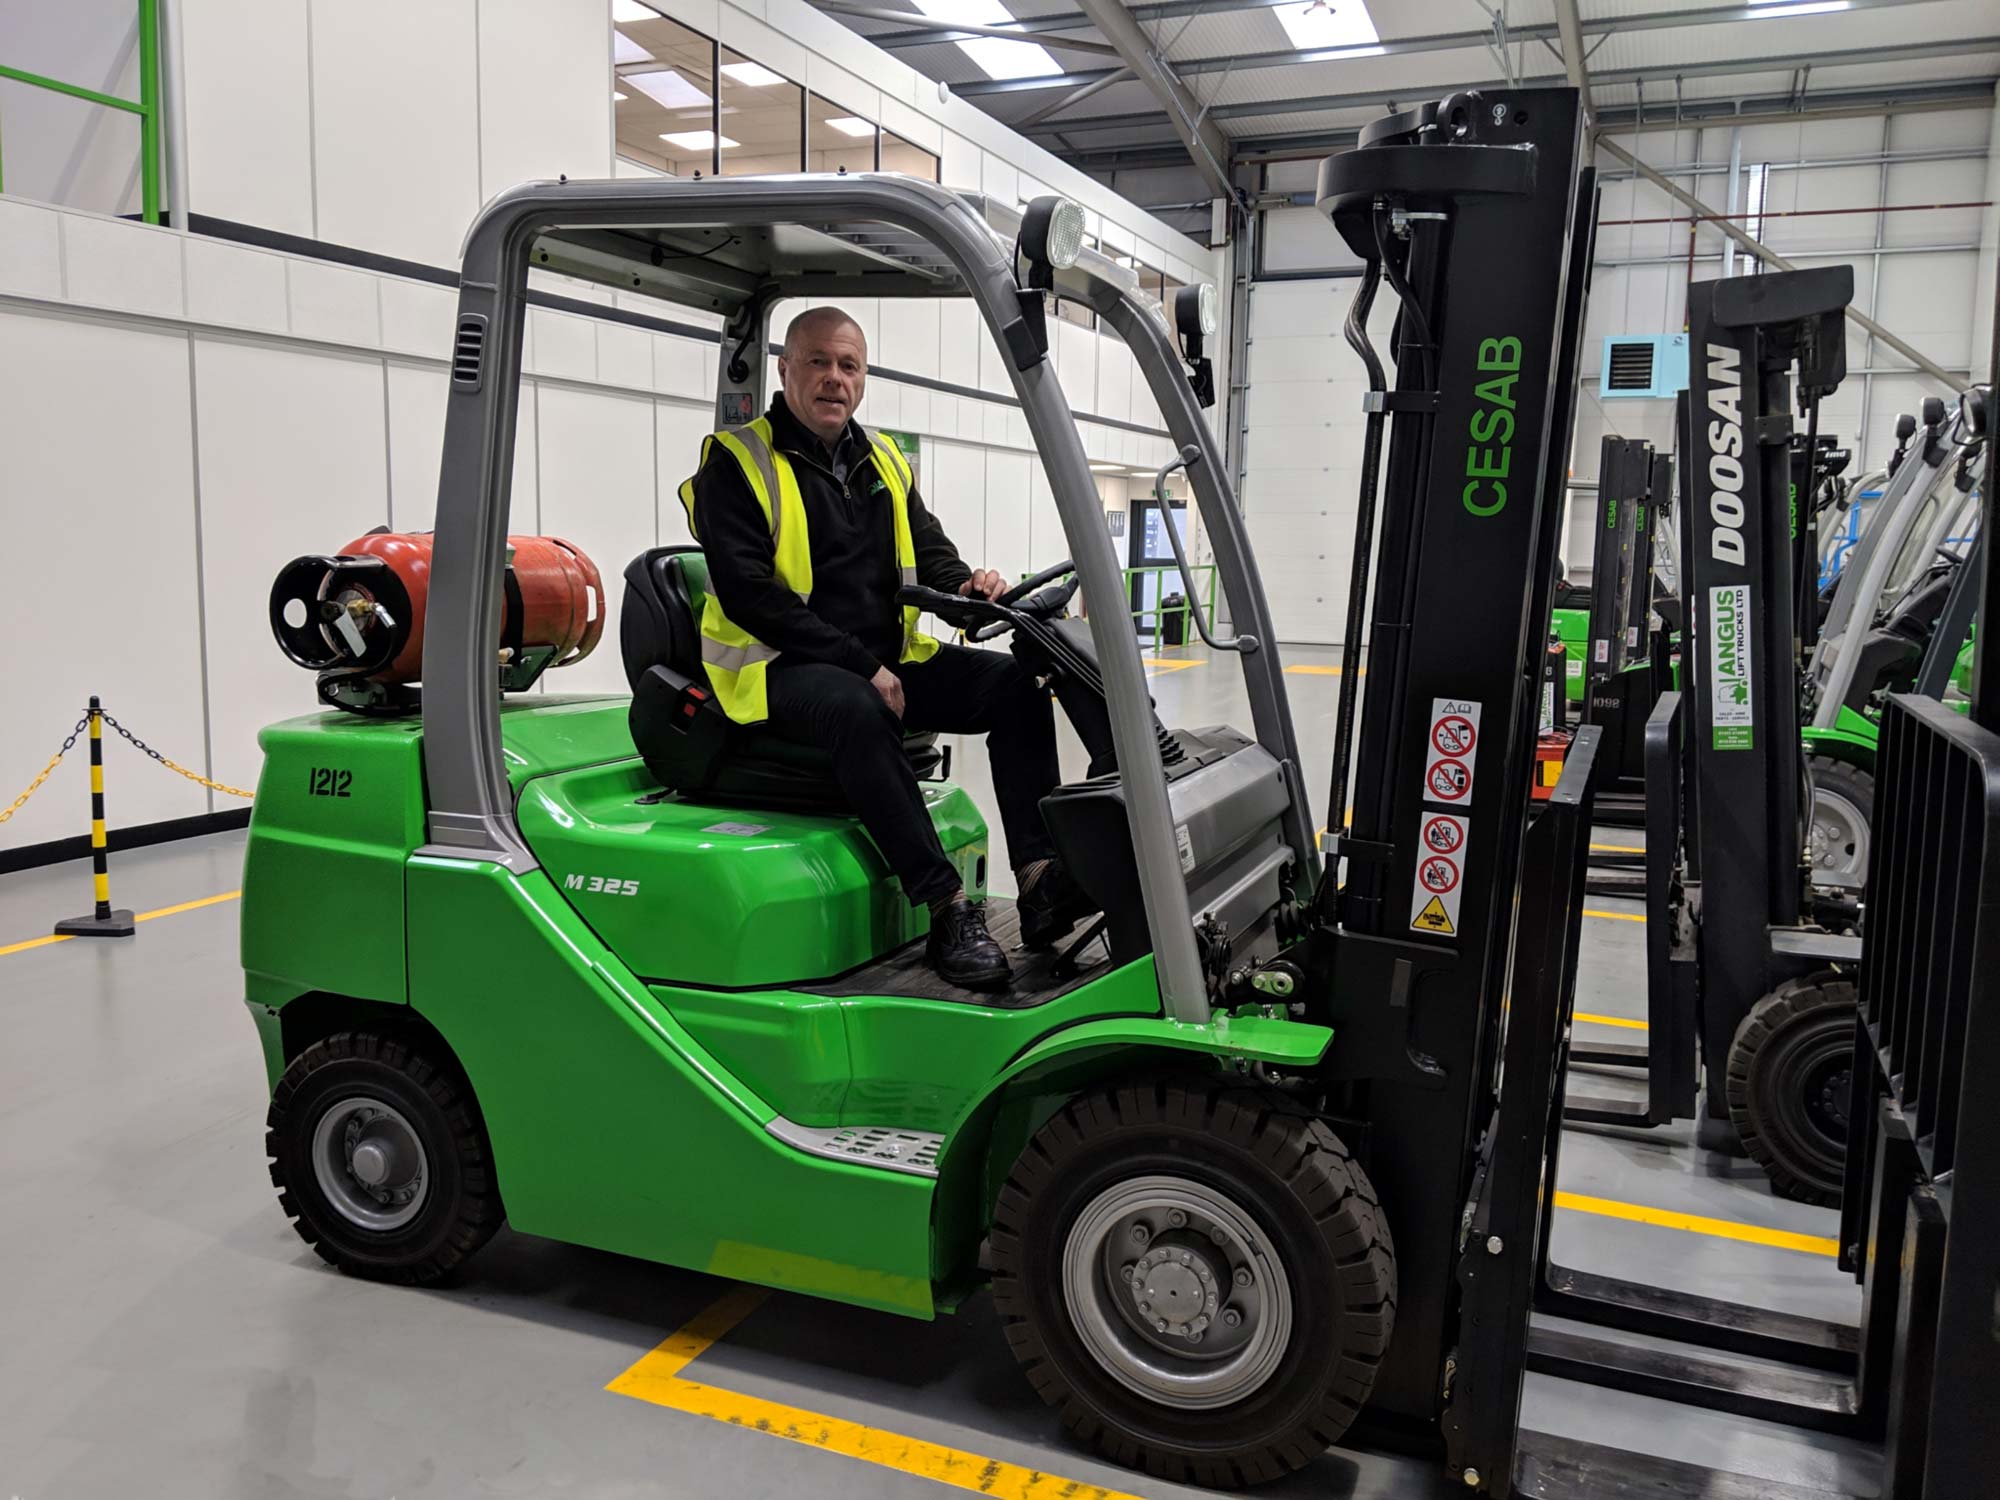 Gas Forklifts Hire, Rental, Servicing, Maintenance & Repairs in Leicester, Northampton, Derby, Warwick, East Midlands, West Midlands, Birmingham and Nottingham